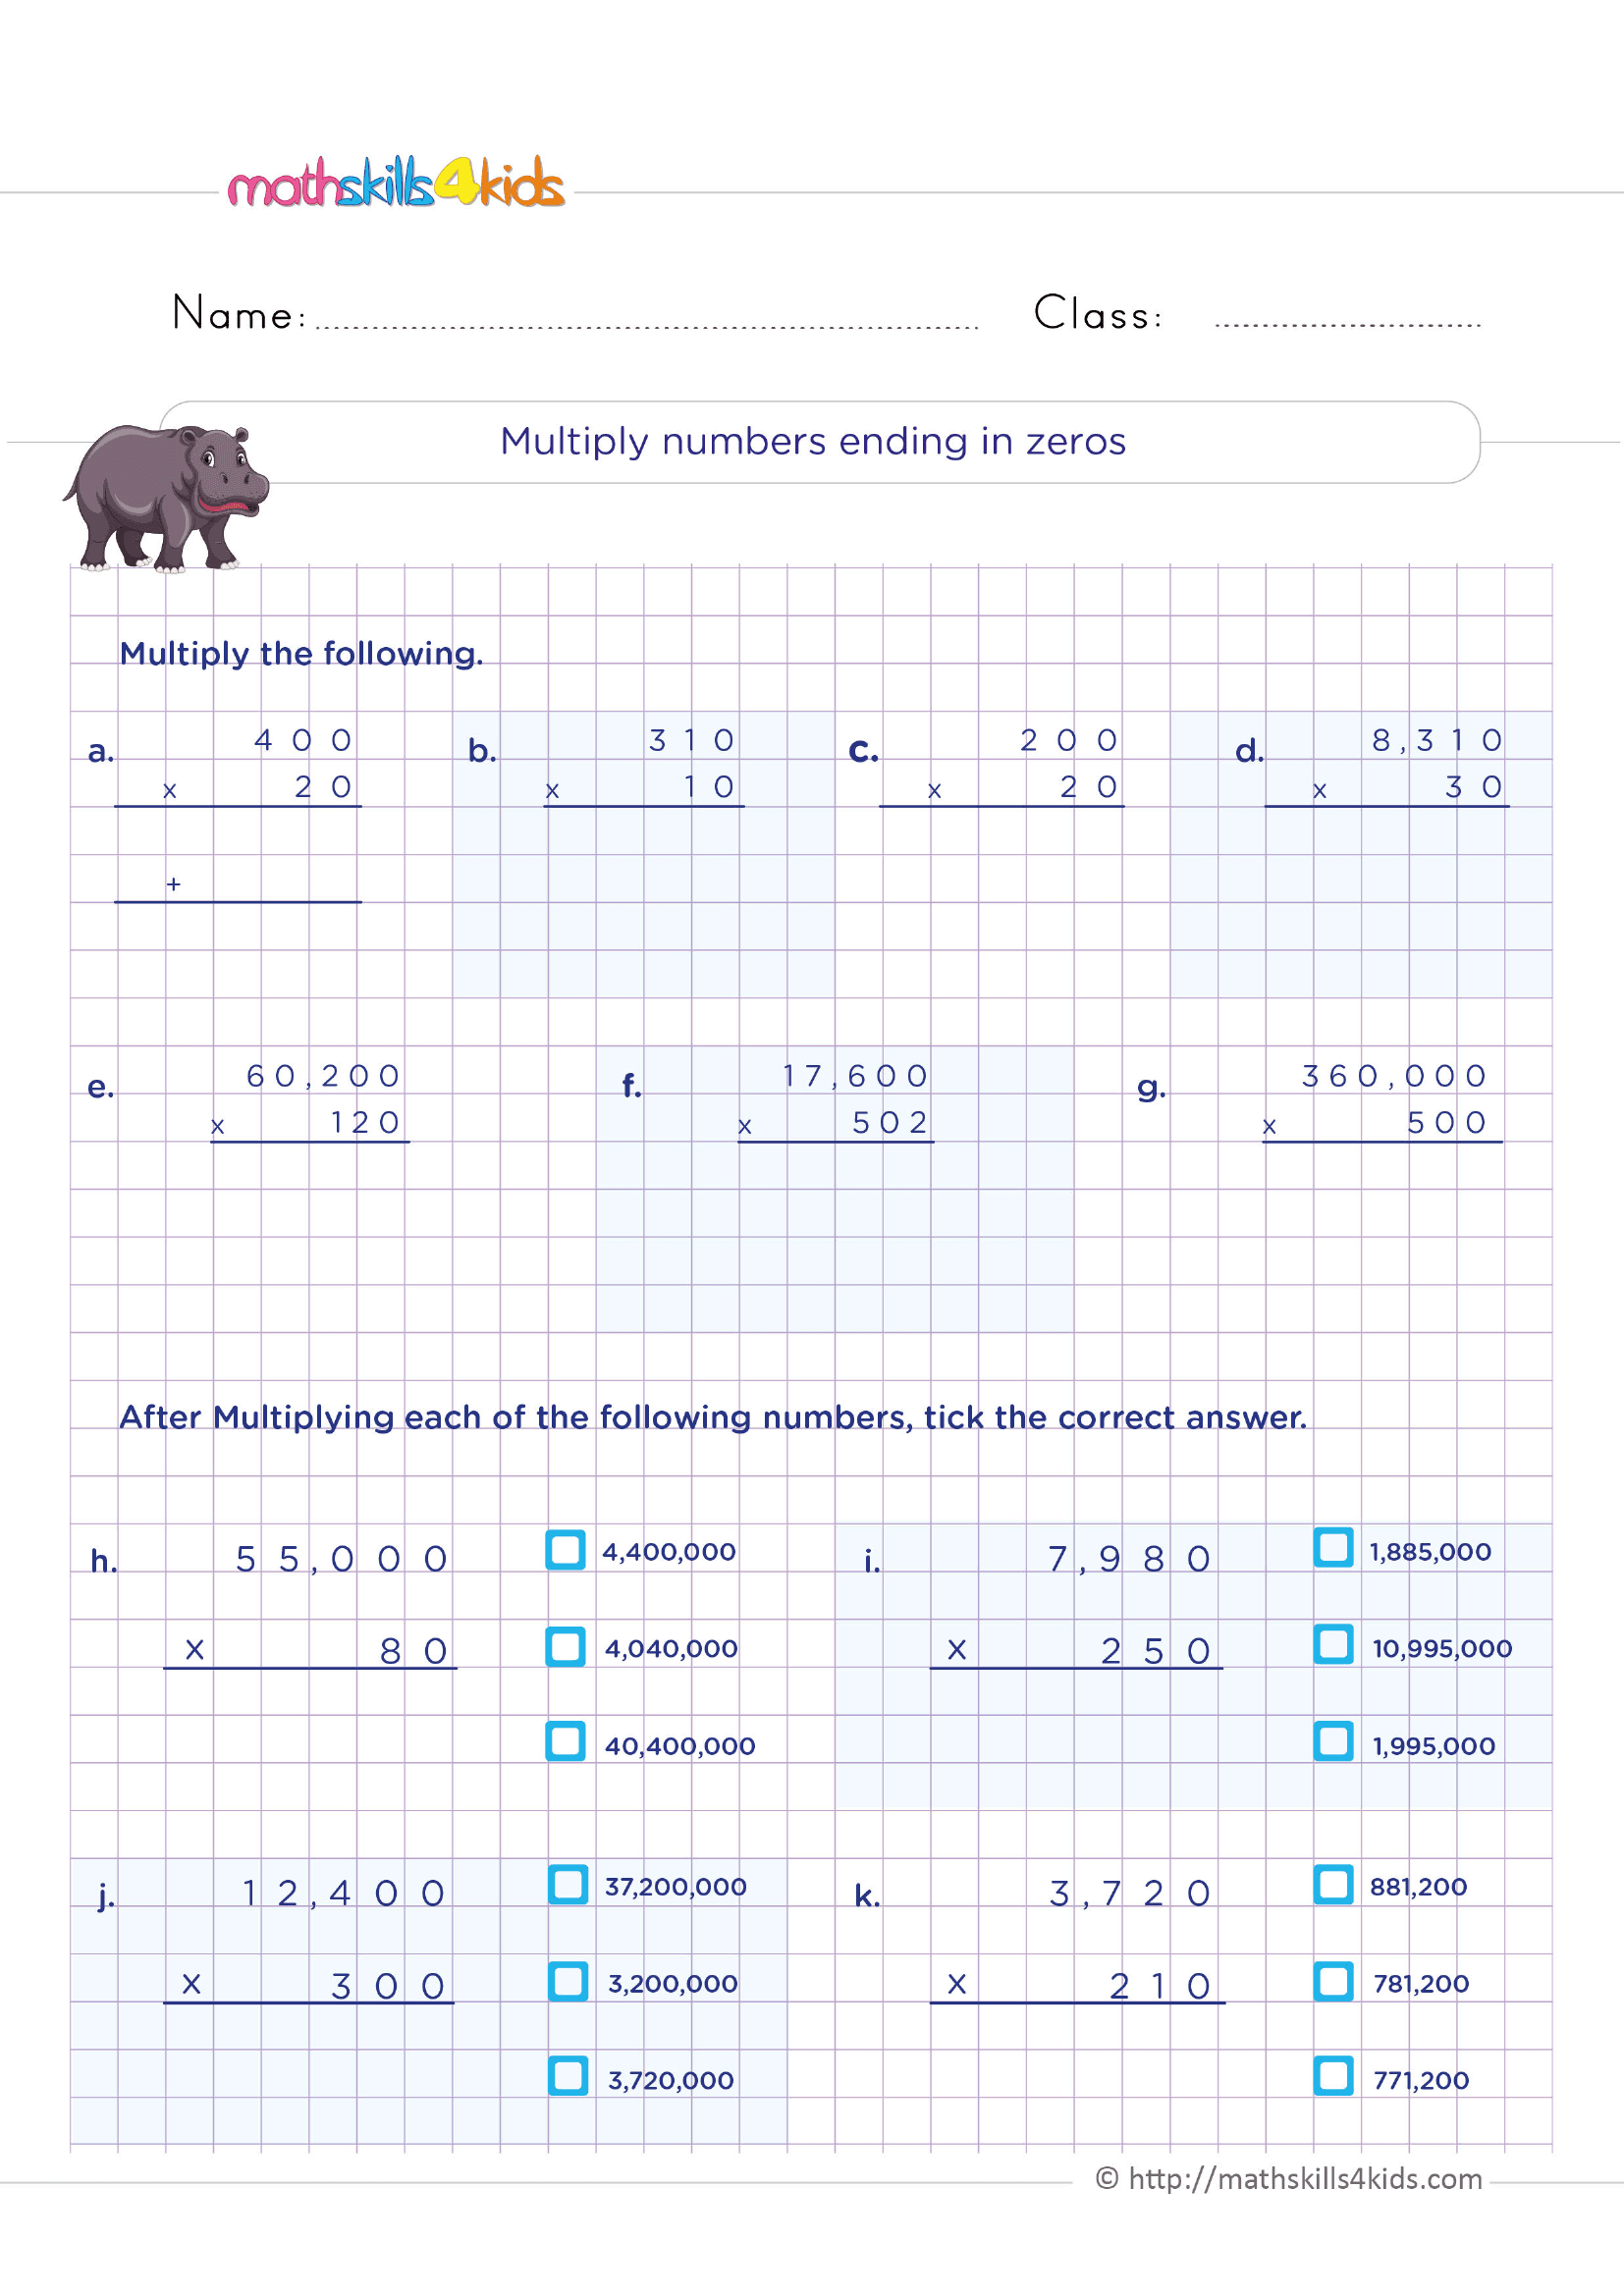 multiplying-whole-numbers-worksheets-numbersworksheetcom-multiply-decimals-by-whole-numbers